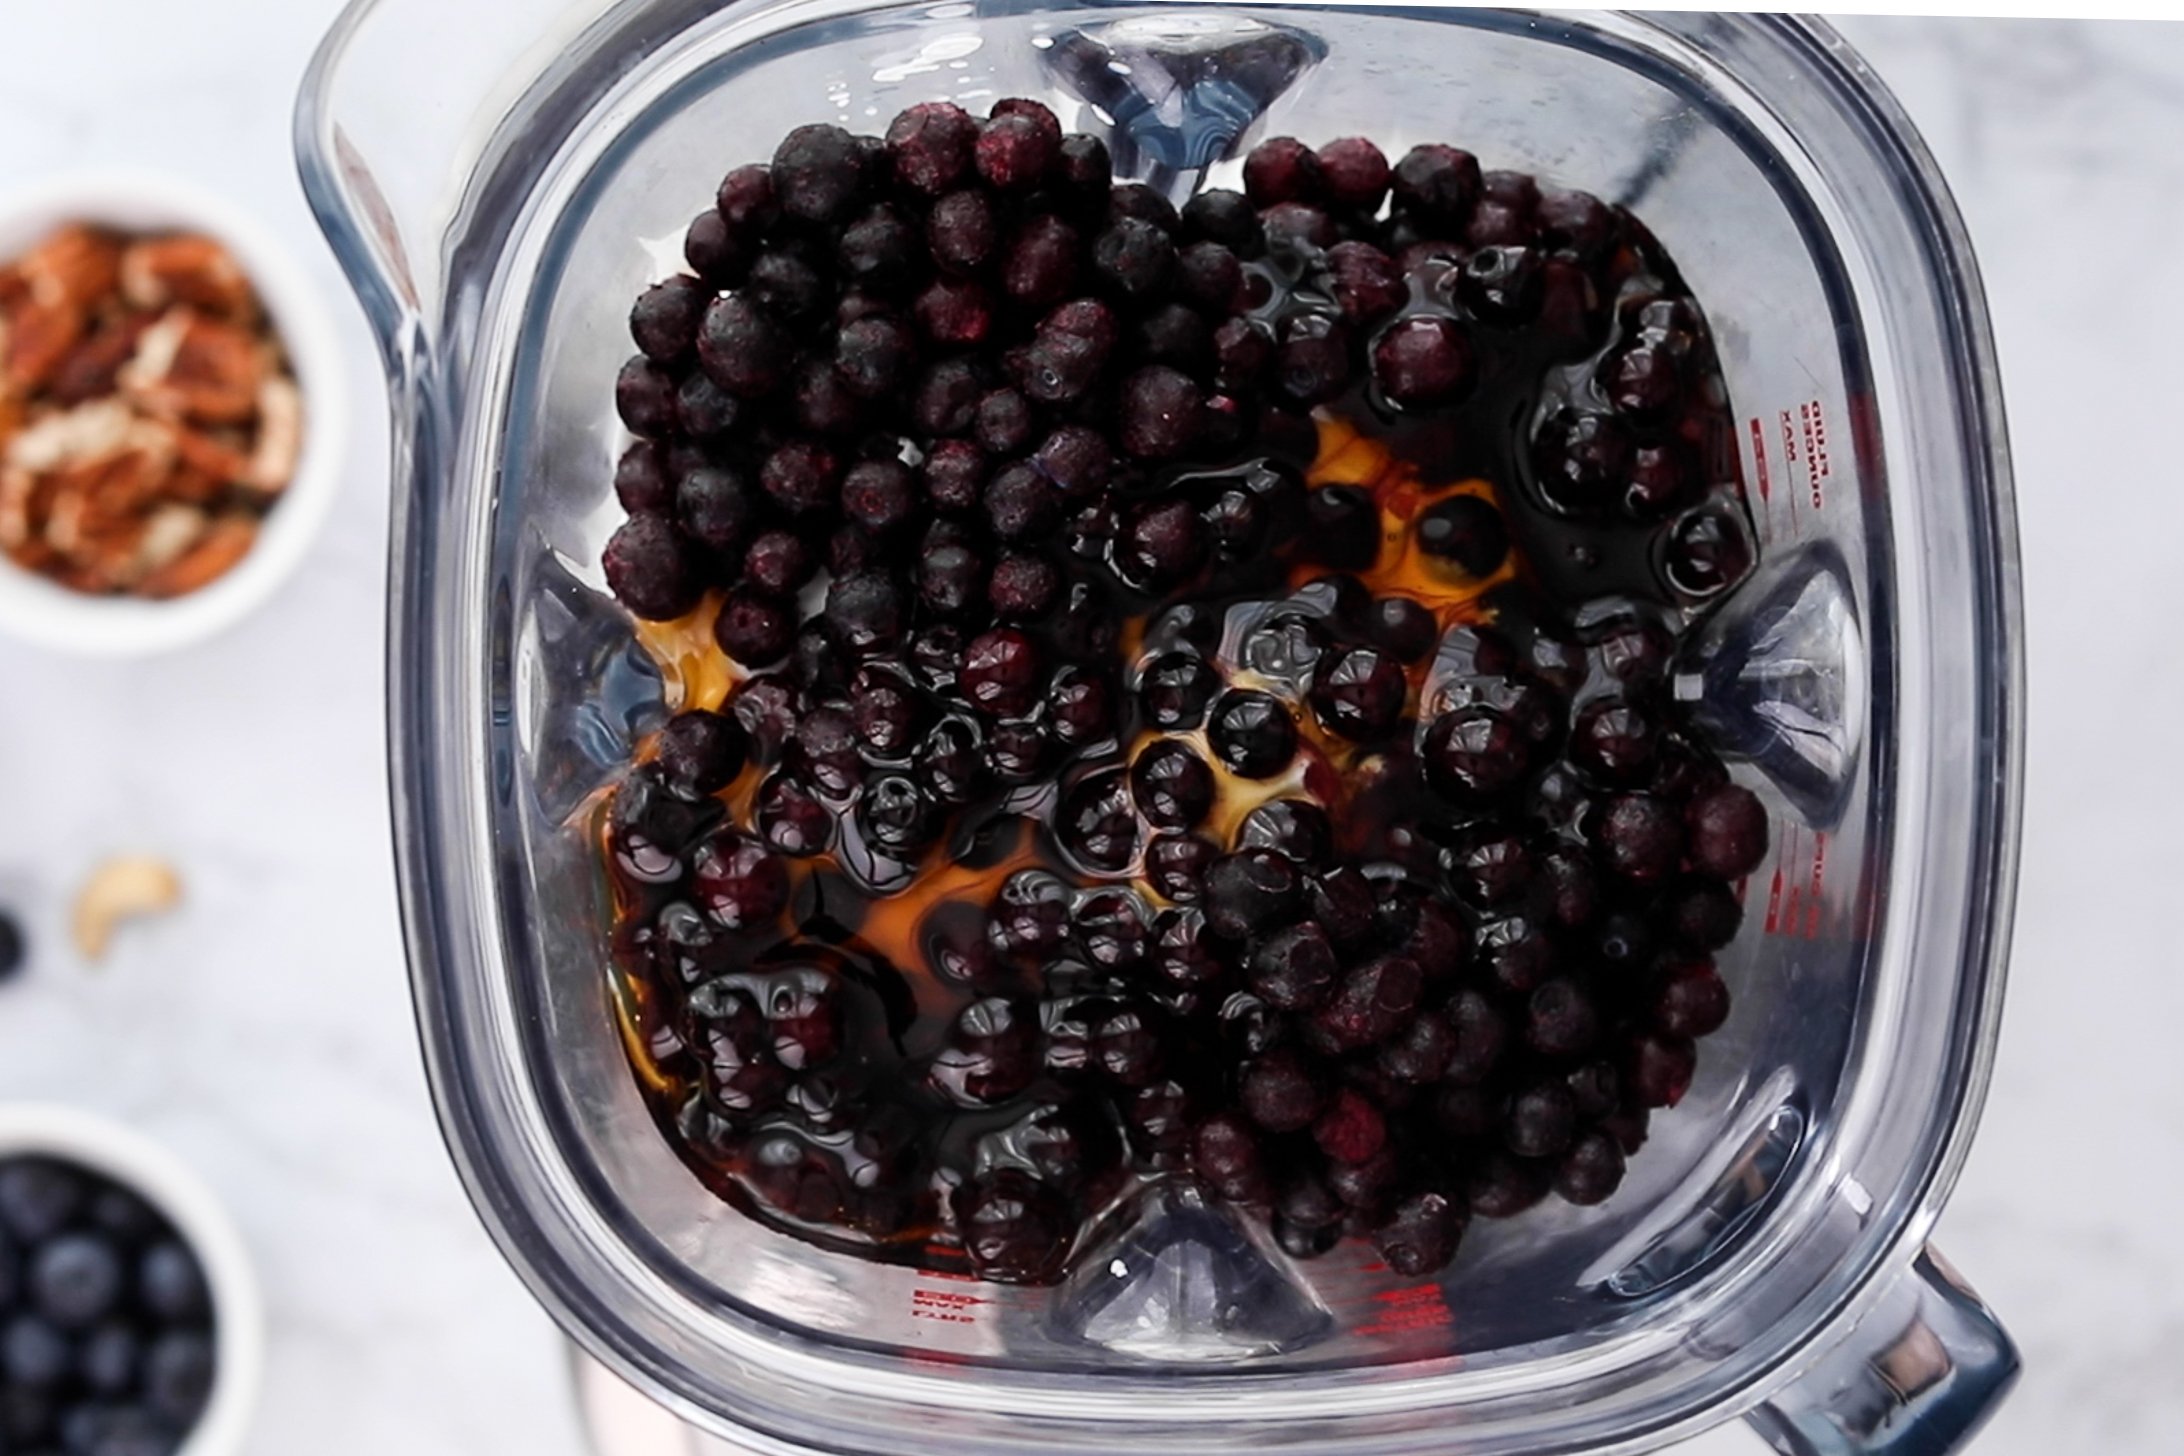 Top-down view of a blender brimming with berries and maple syrup.